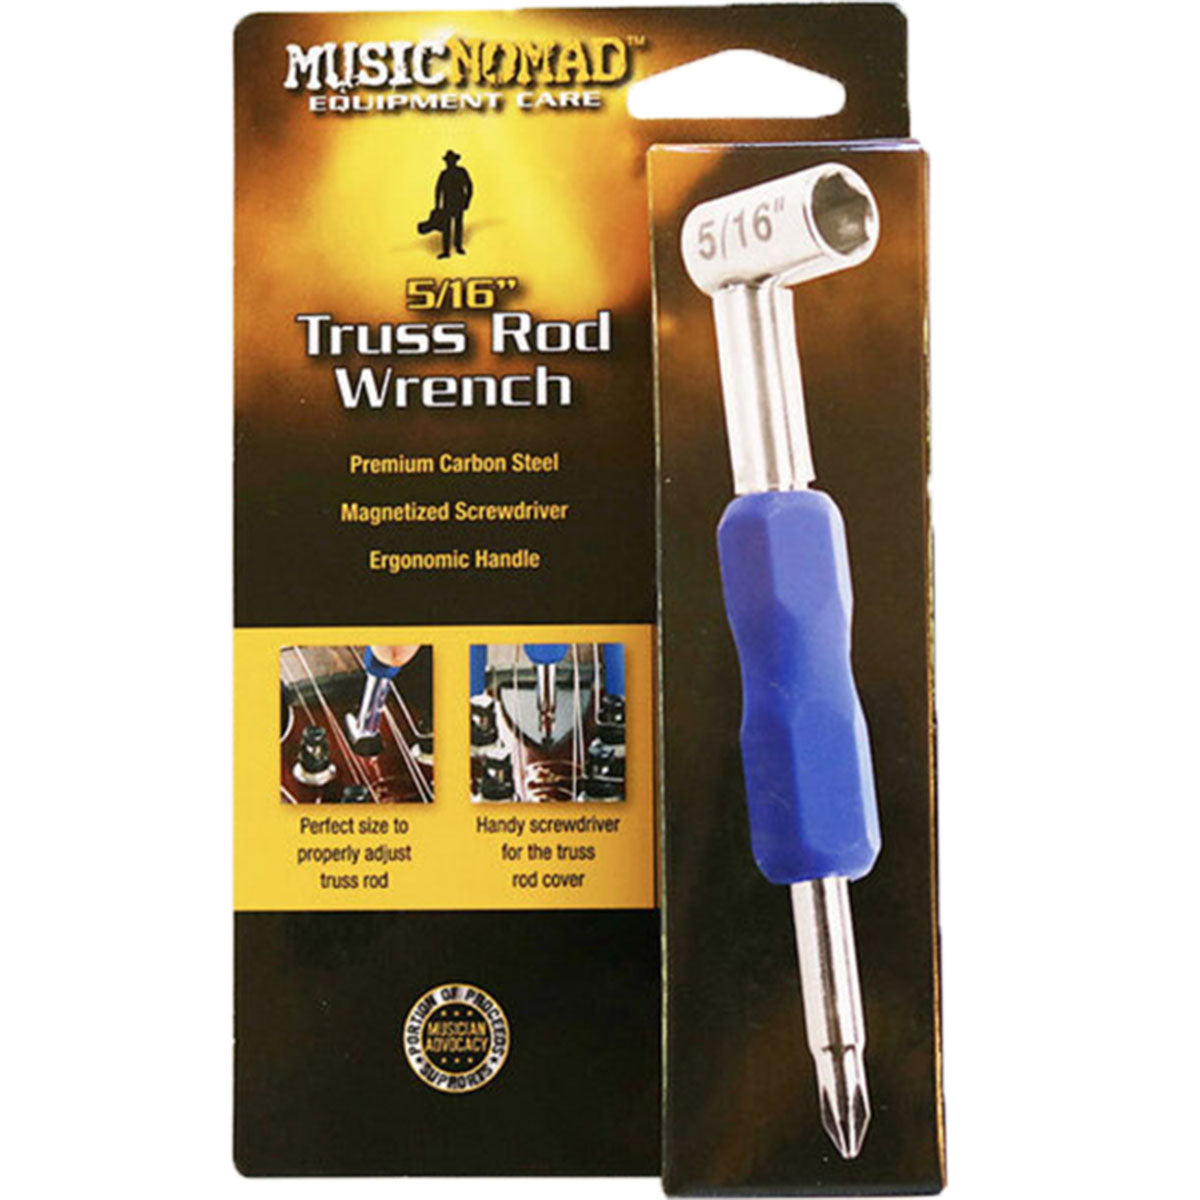 Music Nomad MN232 Premium 5/16inch Truss Rod Wrench w/ Magnetized Screwdriver